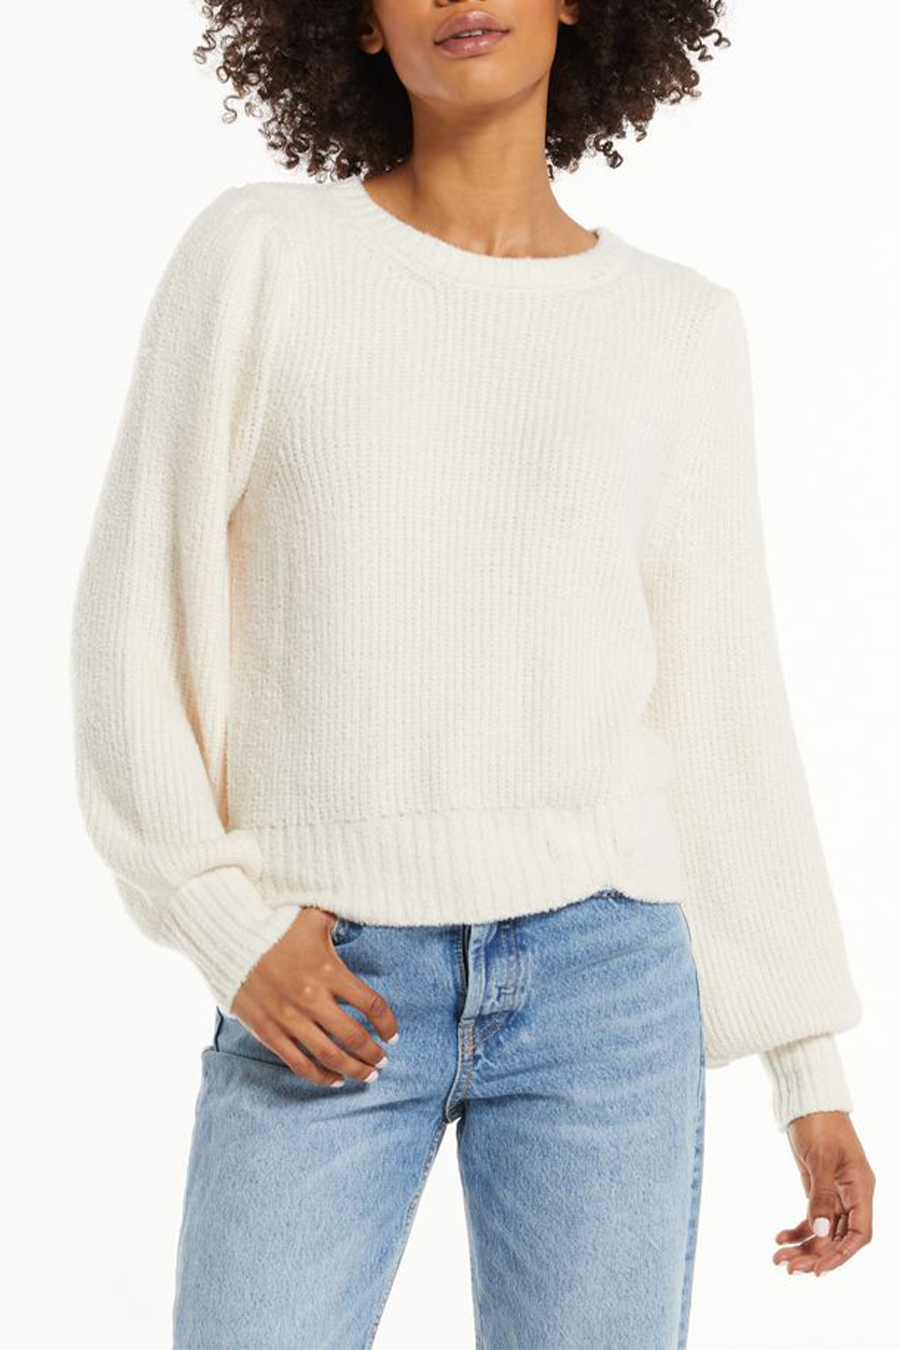 Bailey Puff Sleeve Sweater | Pebble - Main Image Number 1 of 1